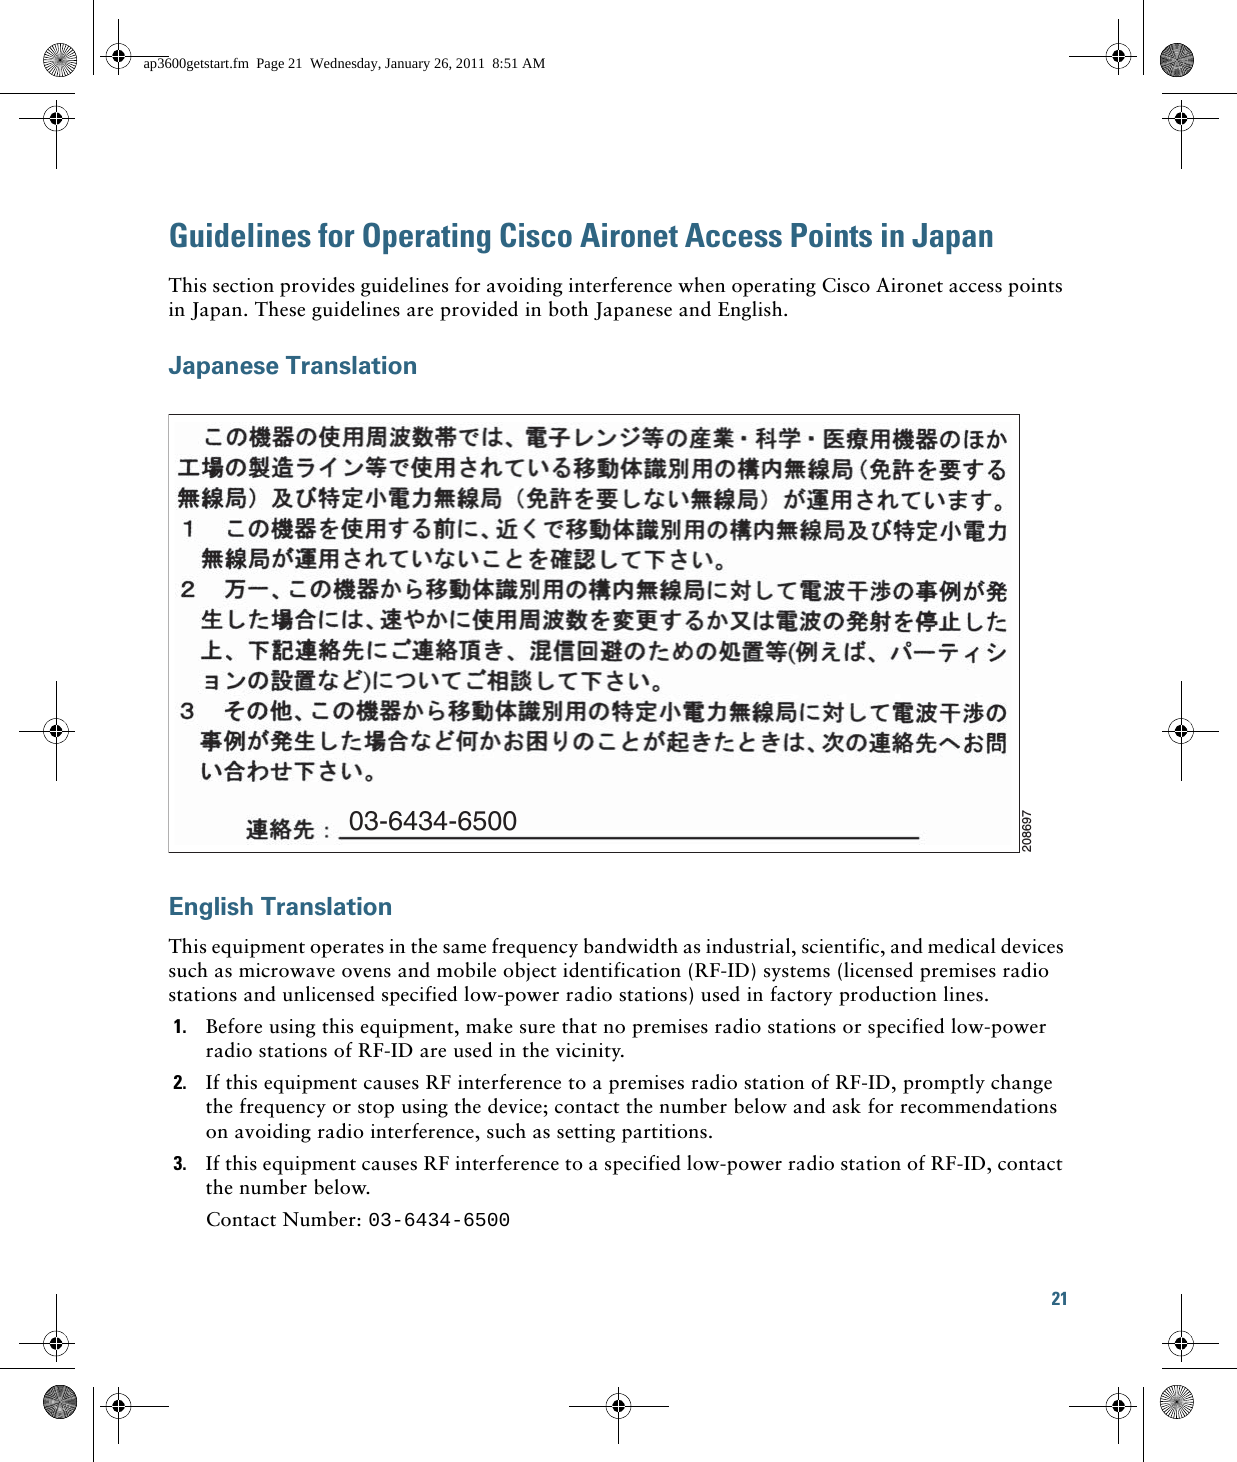 21 Guidelines for Operating Cisco Aironet Access Points in JapanThis section provides guidelines for avoiding interference when operating Cisco Aironet access points in Japan. These guidelines are provided in both Japanese and English.Japanese TranslationEnglish TranslationThis equipment operates in the same frequency bandwidth as industrial, scientific, and medical devices such as microwave ovens and mobile object identification (RF-ID) systems (licensed premises radio stations and unlicensed specified low-power radio stations) used in factory production lines.1. Before using this equipment, make sure that no premises radio stations or specified low-power radio stations of RF-ID are used in the vicinity.2. If this equipment causes RF interference to a premises radio station of RF-ID, promptly change the frequency or stop using the device; contact the number below and ask for recommendations on avoiding radio interference, such as setting partitions.3. If this equipment causes RF interference to a specified low-power radio station of RF-ID, contact the number below.Contact Number: 03-6434-650003-6434-6500208697ap3600getstart.fm  Page 21  Wednesday, January 26, 2011  8:51 AM